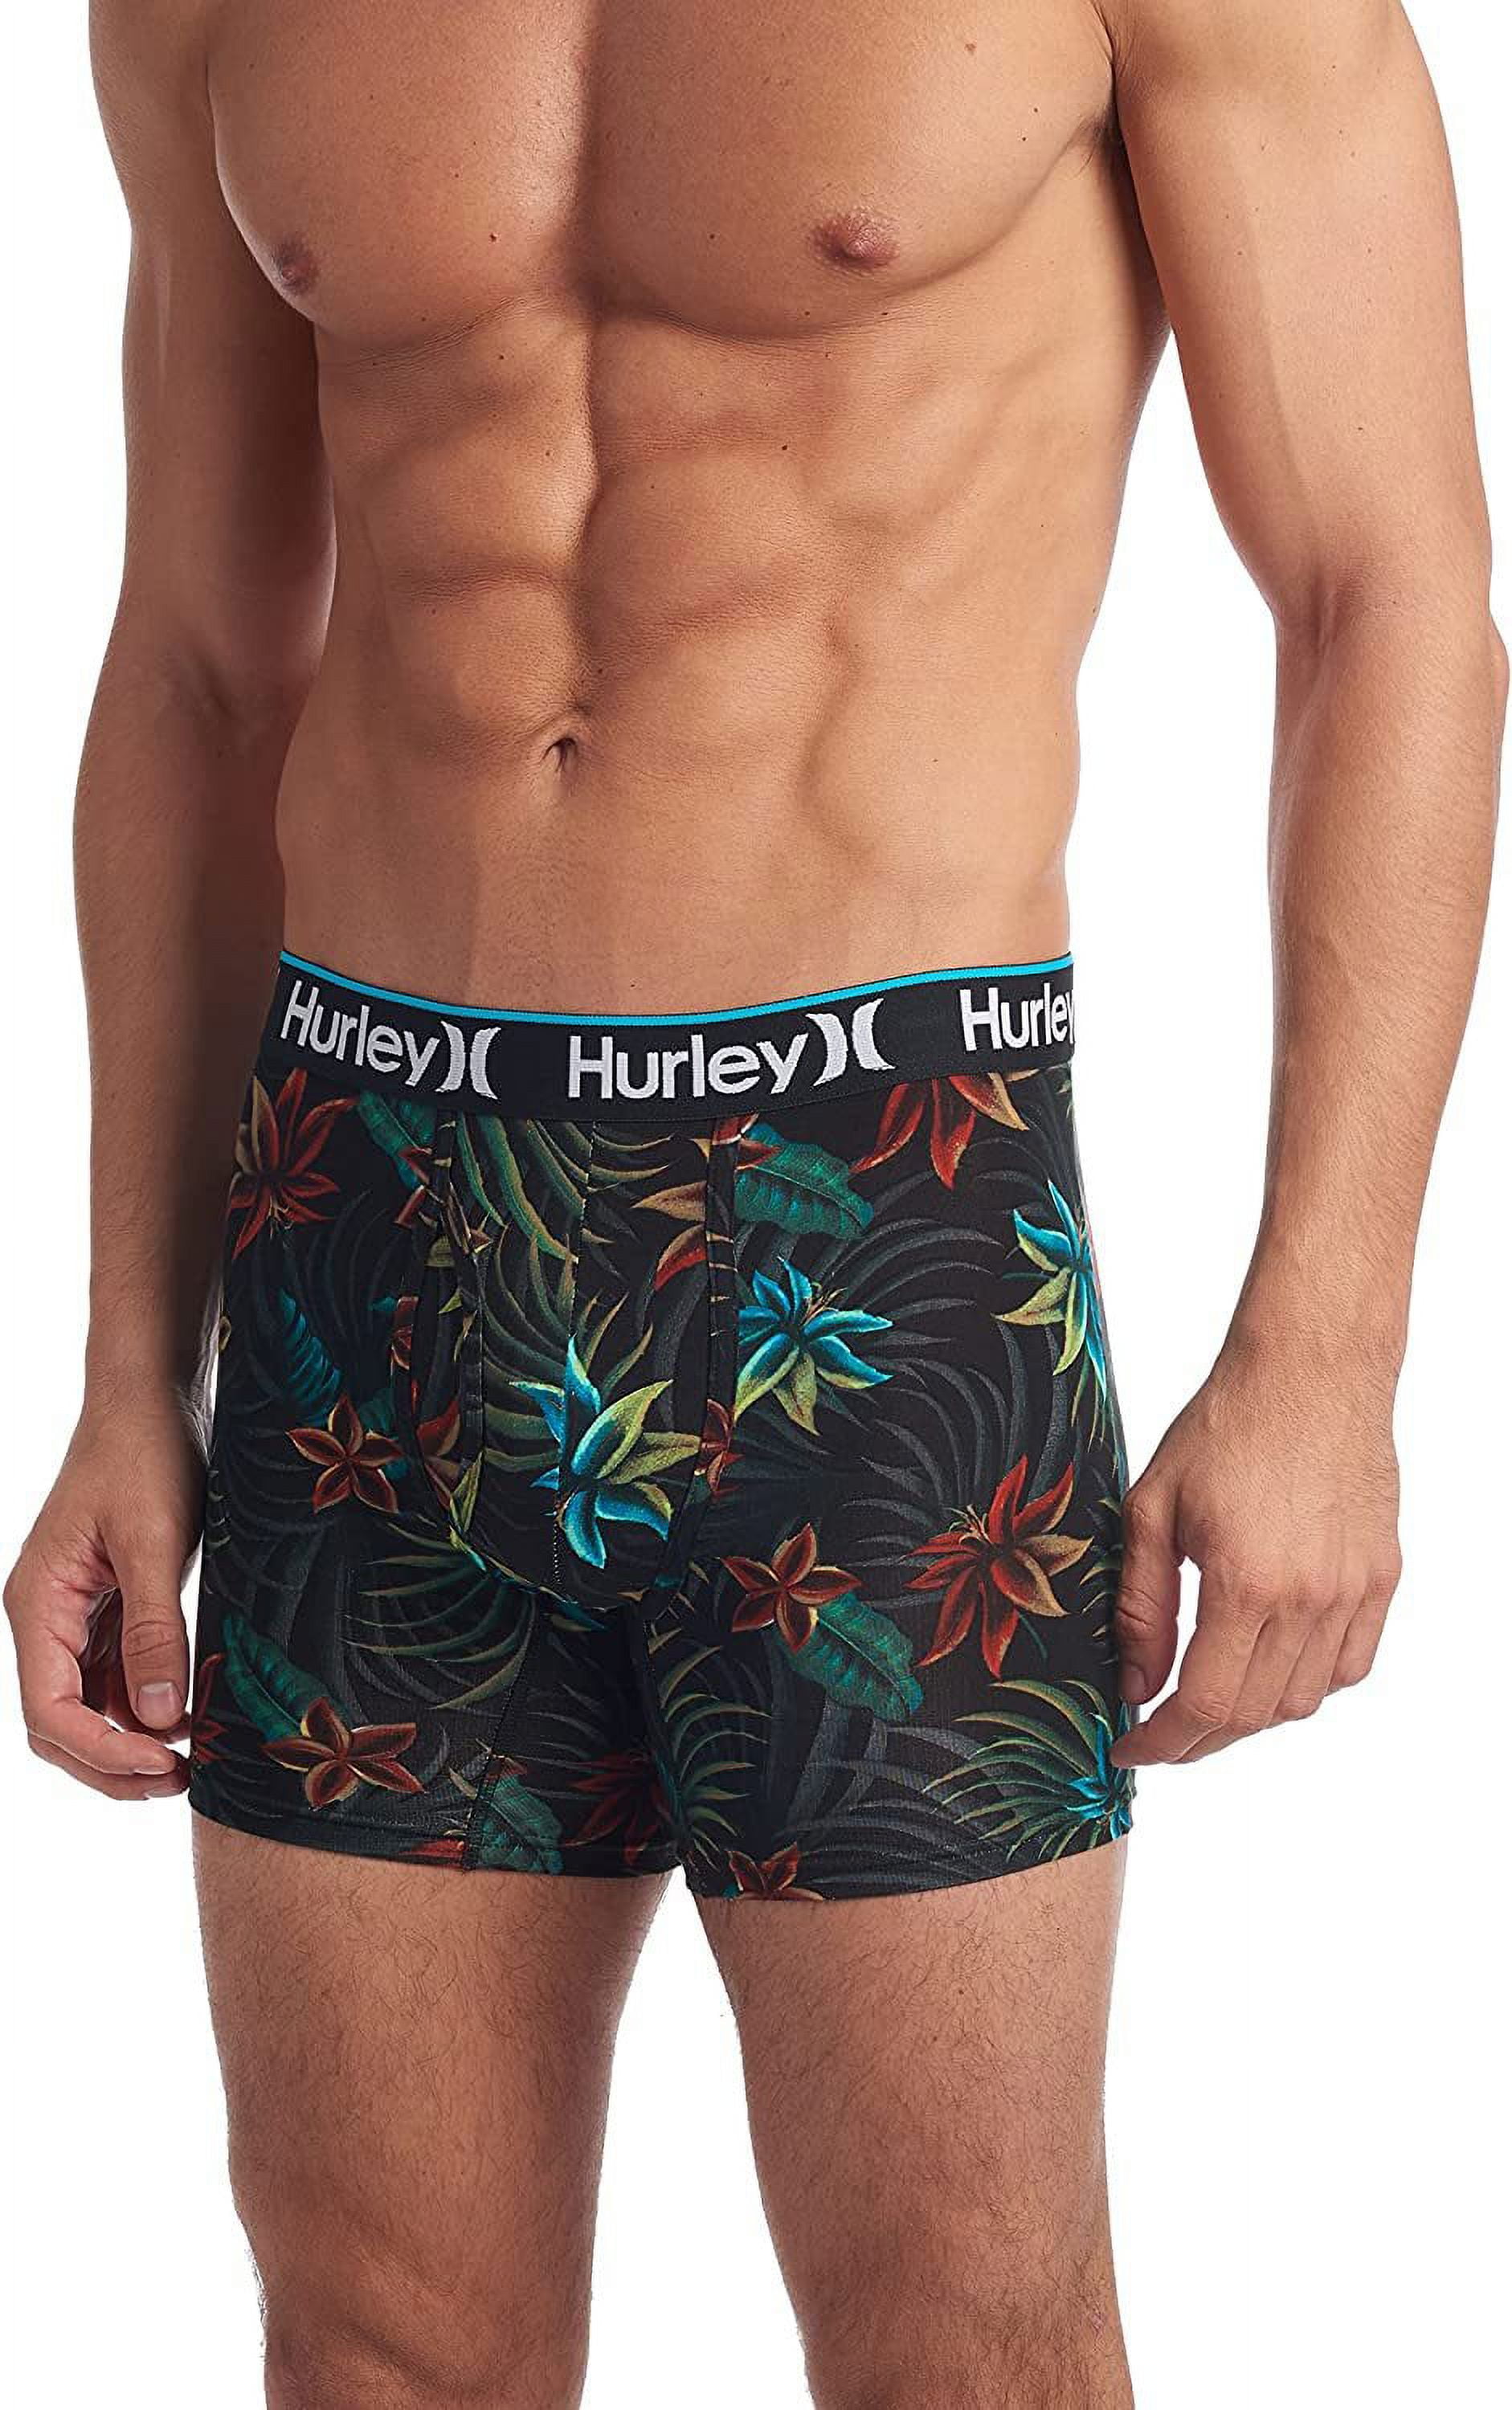  Hurley Boys' Classic Boxer Briefs (2-Pack), Black, S: Clothing,  Shoes & Jewelry